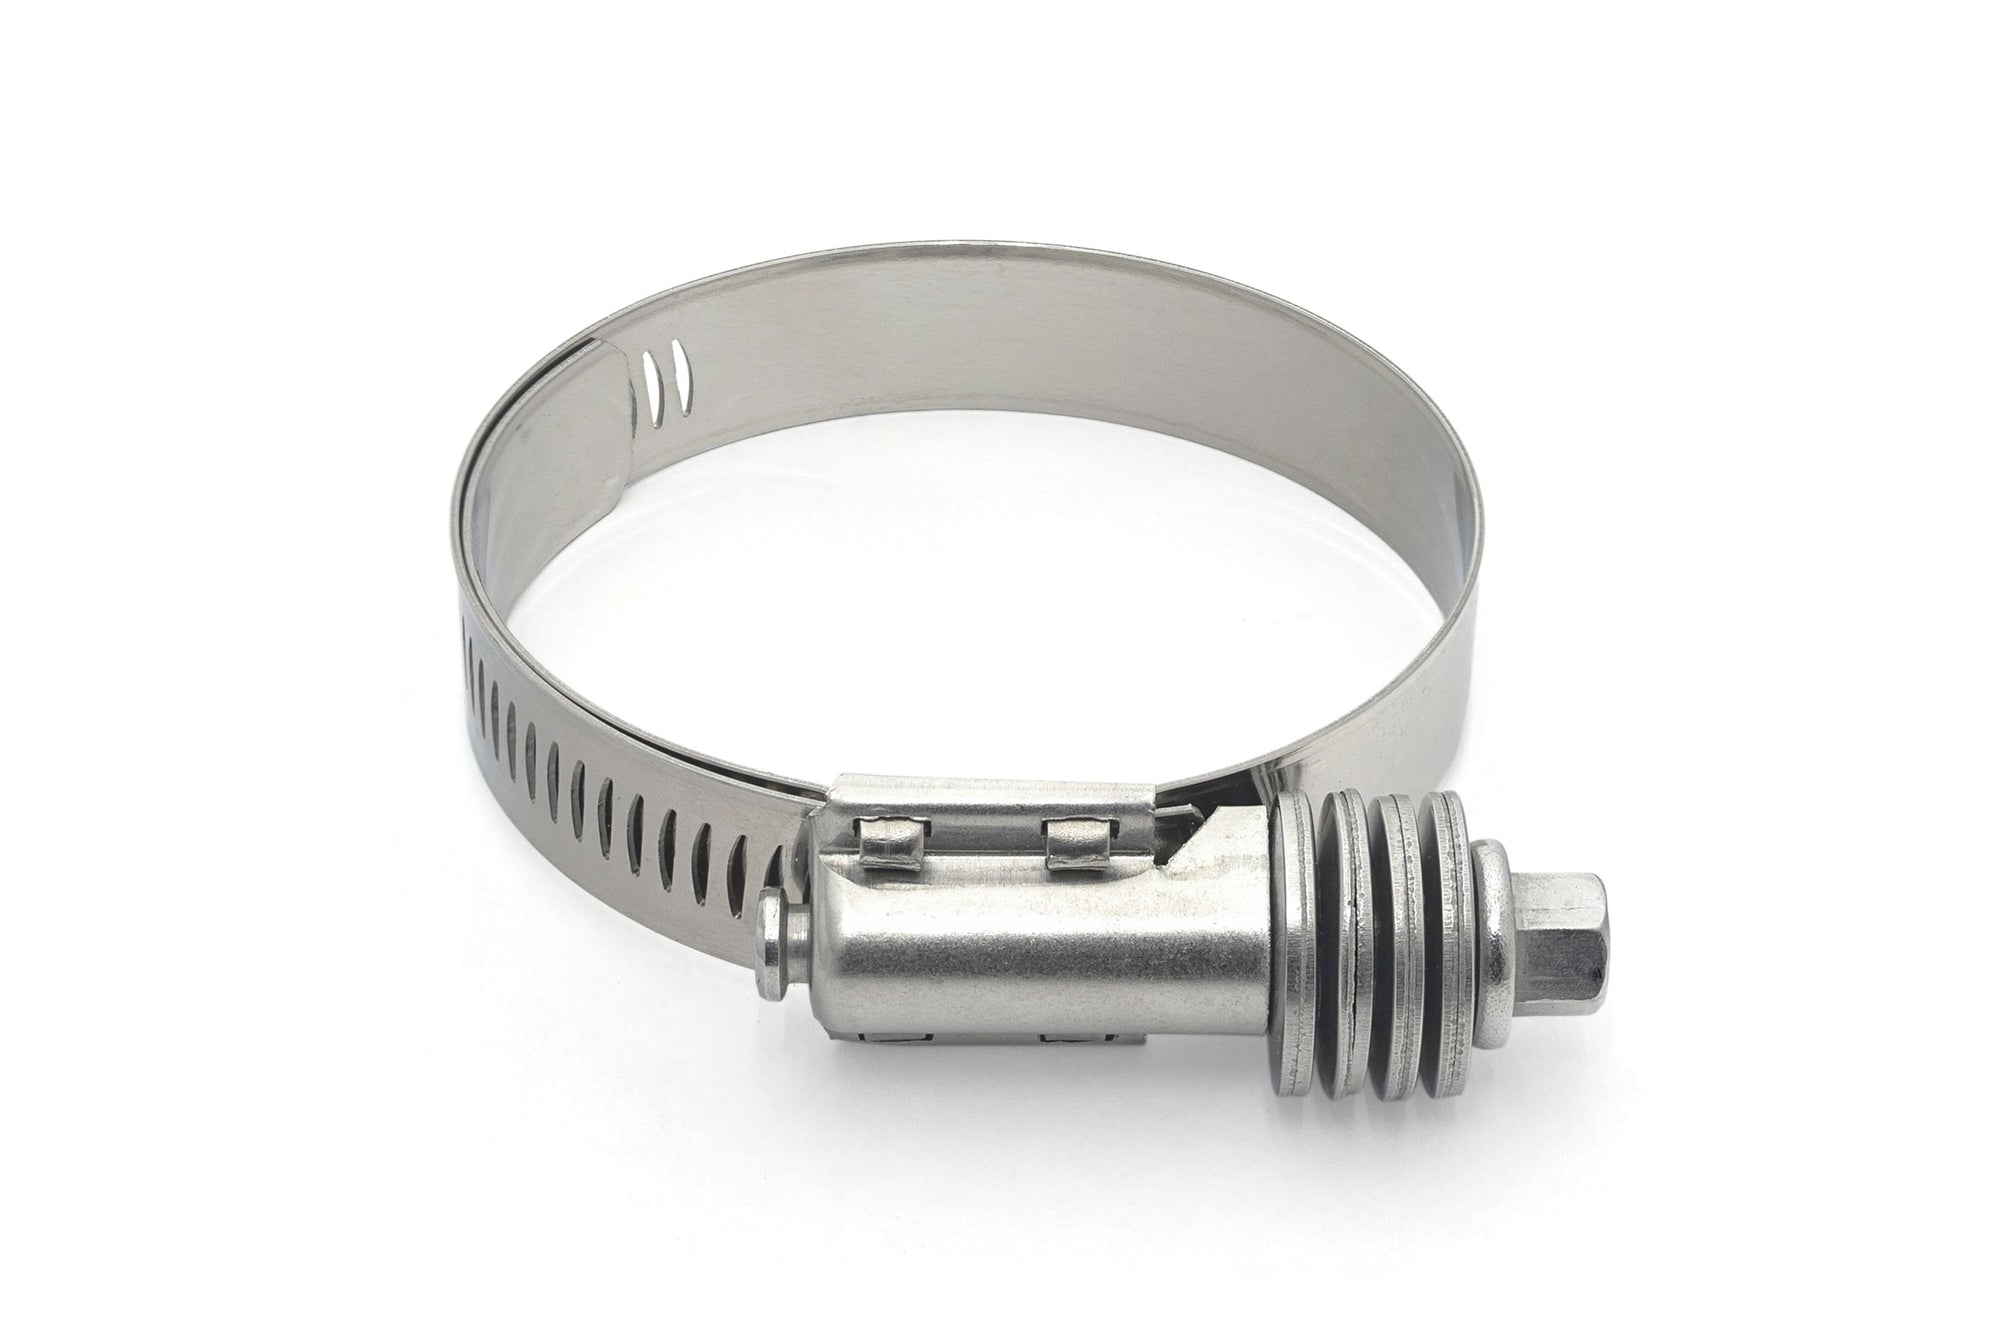 HPS Stainless Steel Heavy Duty Constant Tension Hose Clamp 3-3/4 - 4-5/8 inch 95mm - 117mm Size # 462